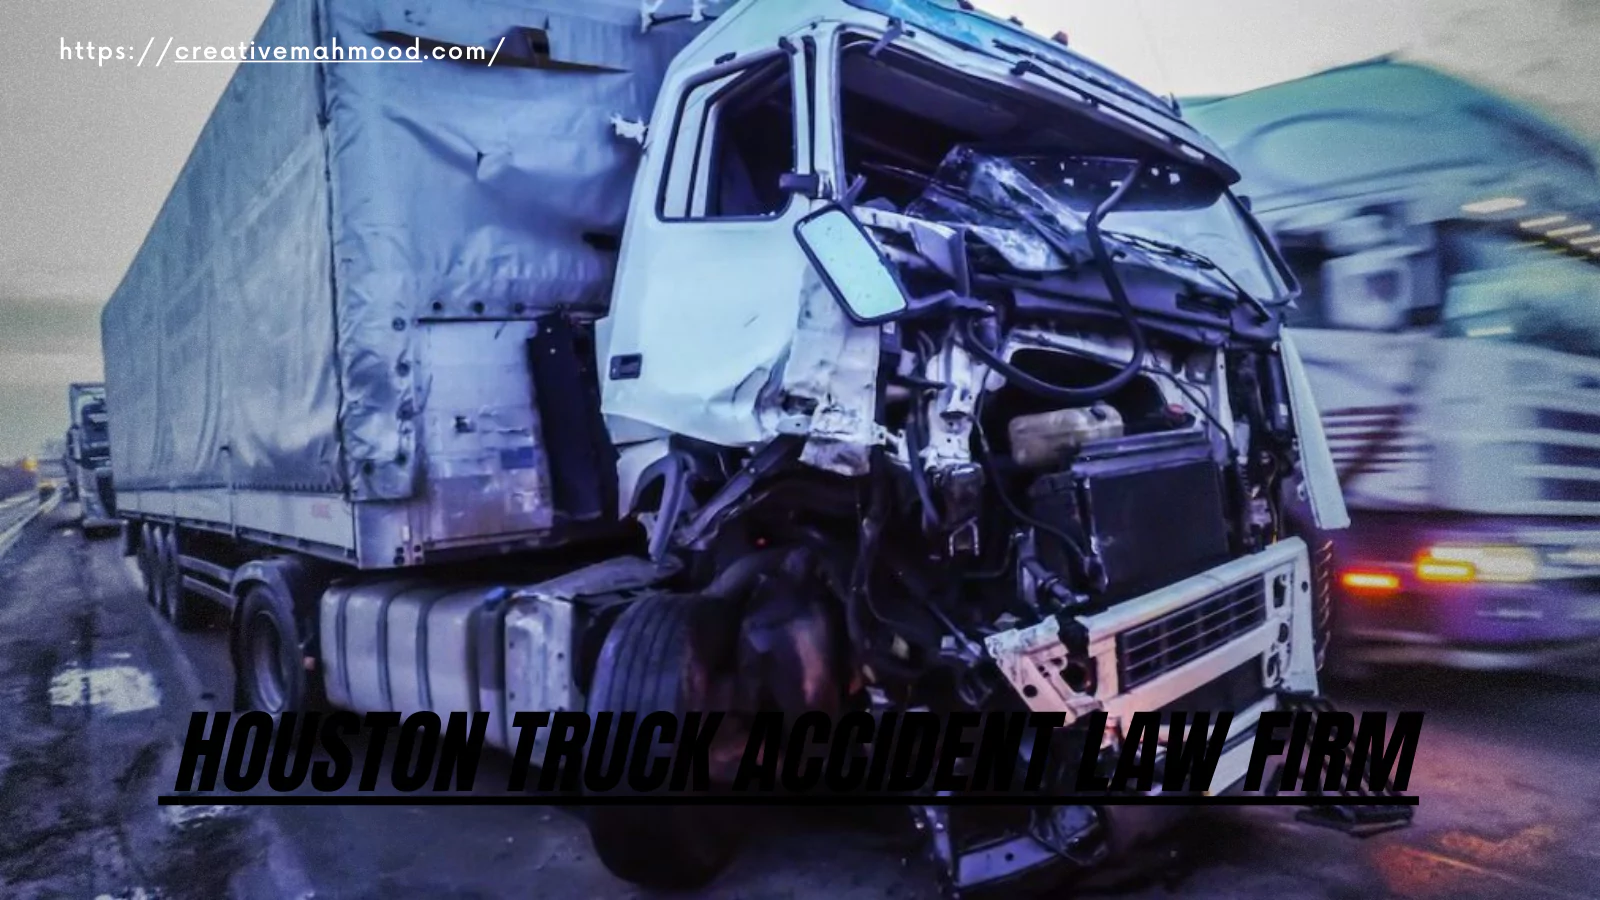 Houston truck accident law firm